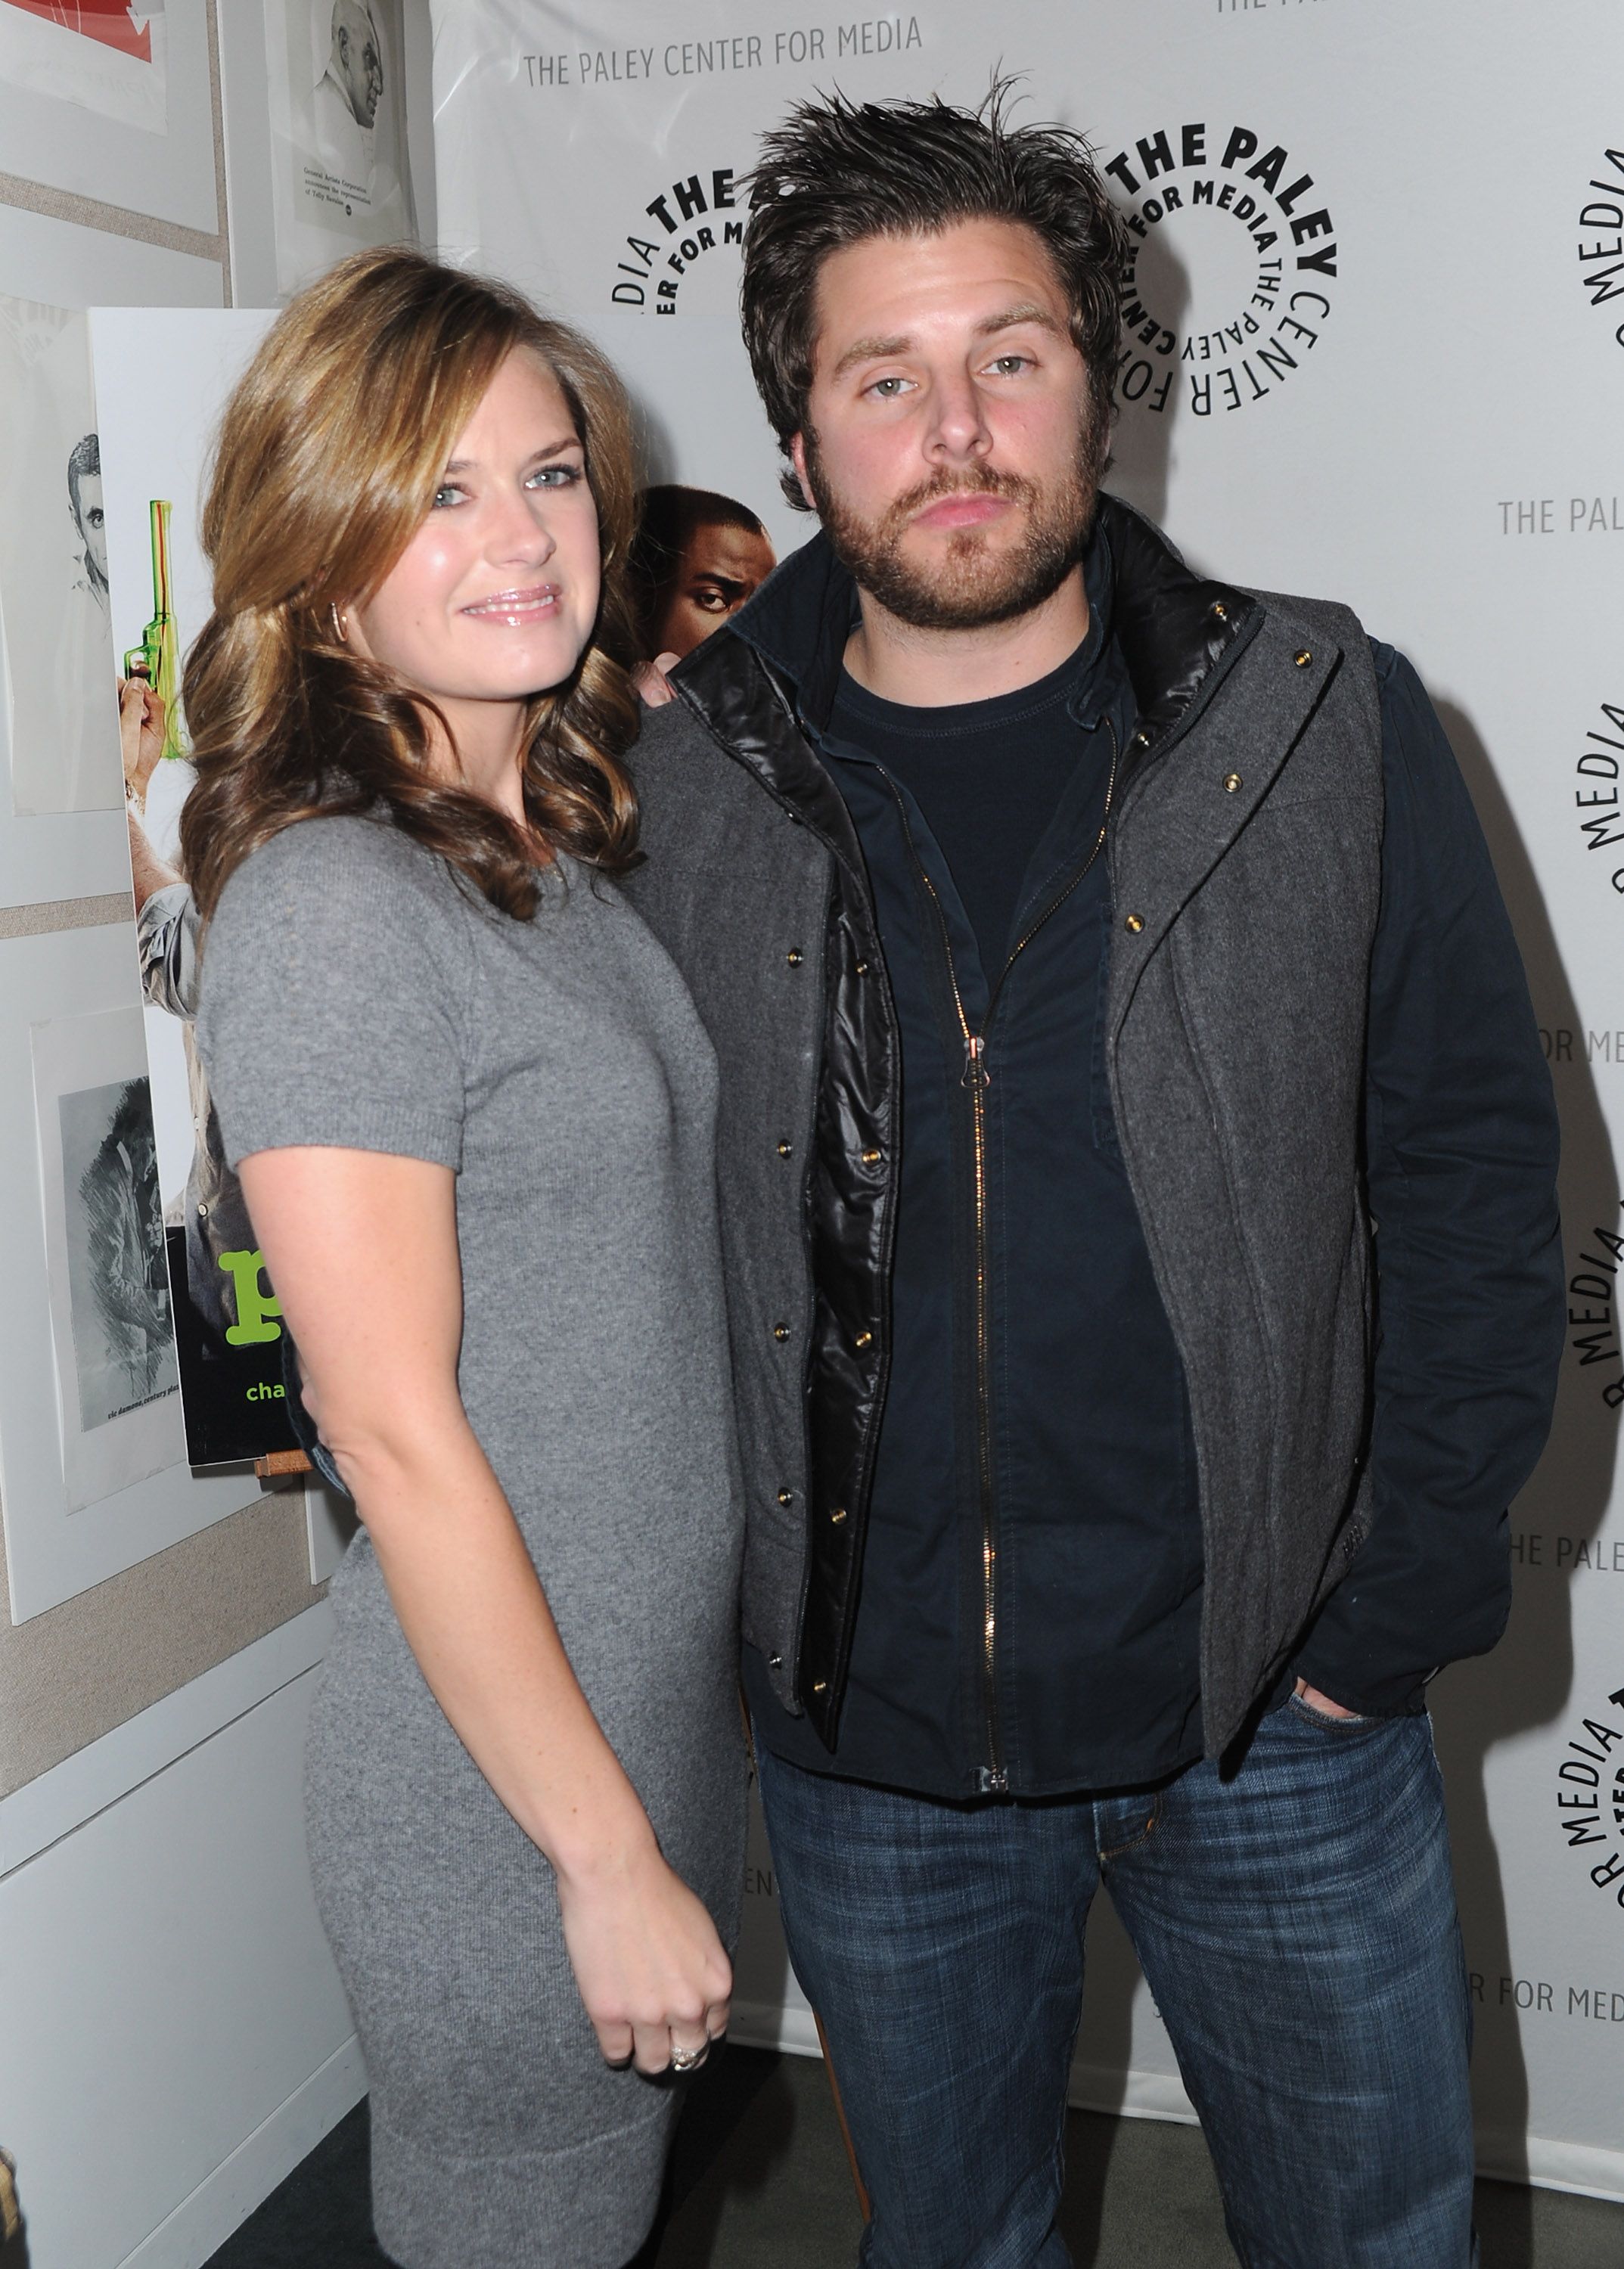 Is James Roday Rodriguez Married? He Seems to Be Single Now